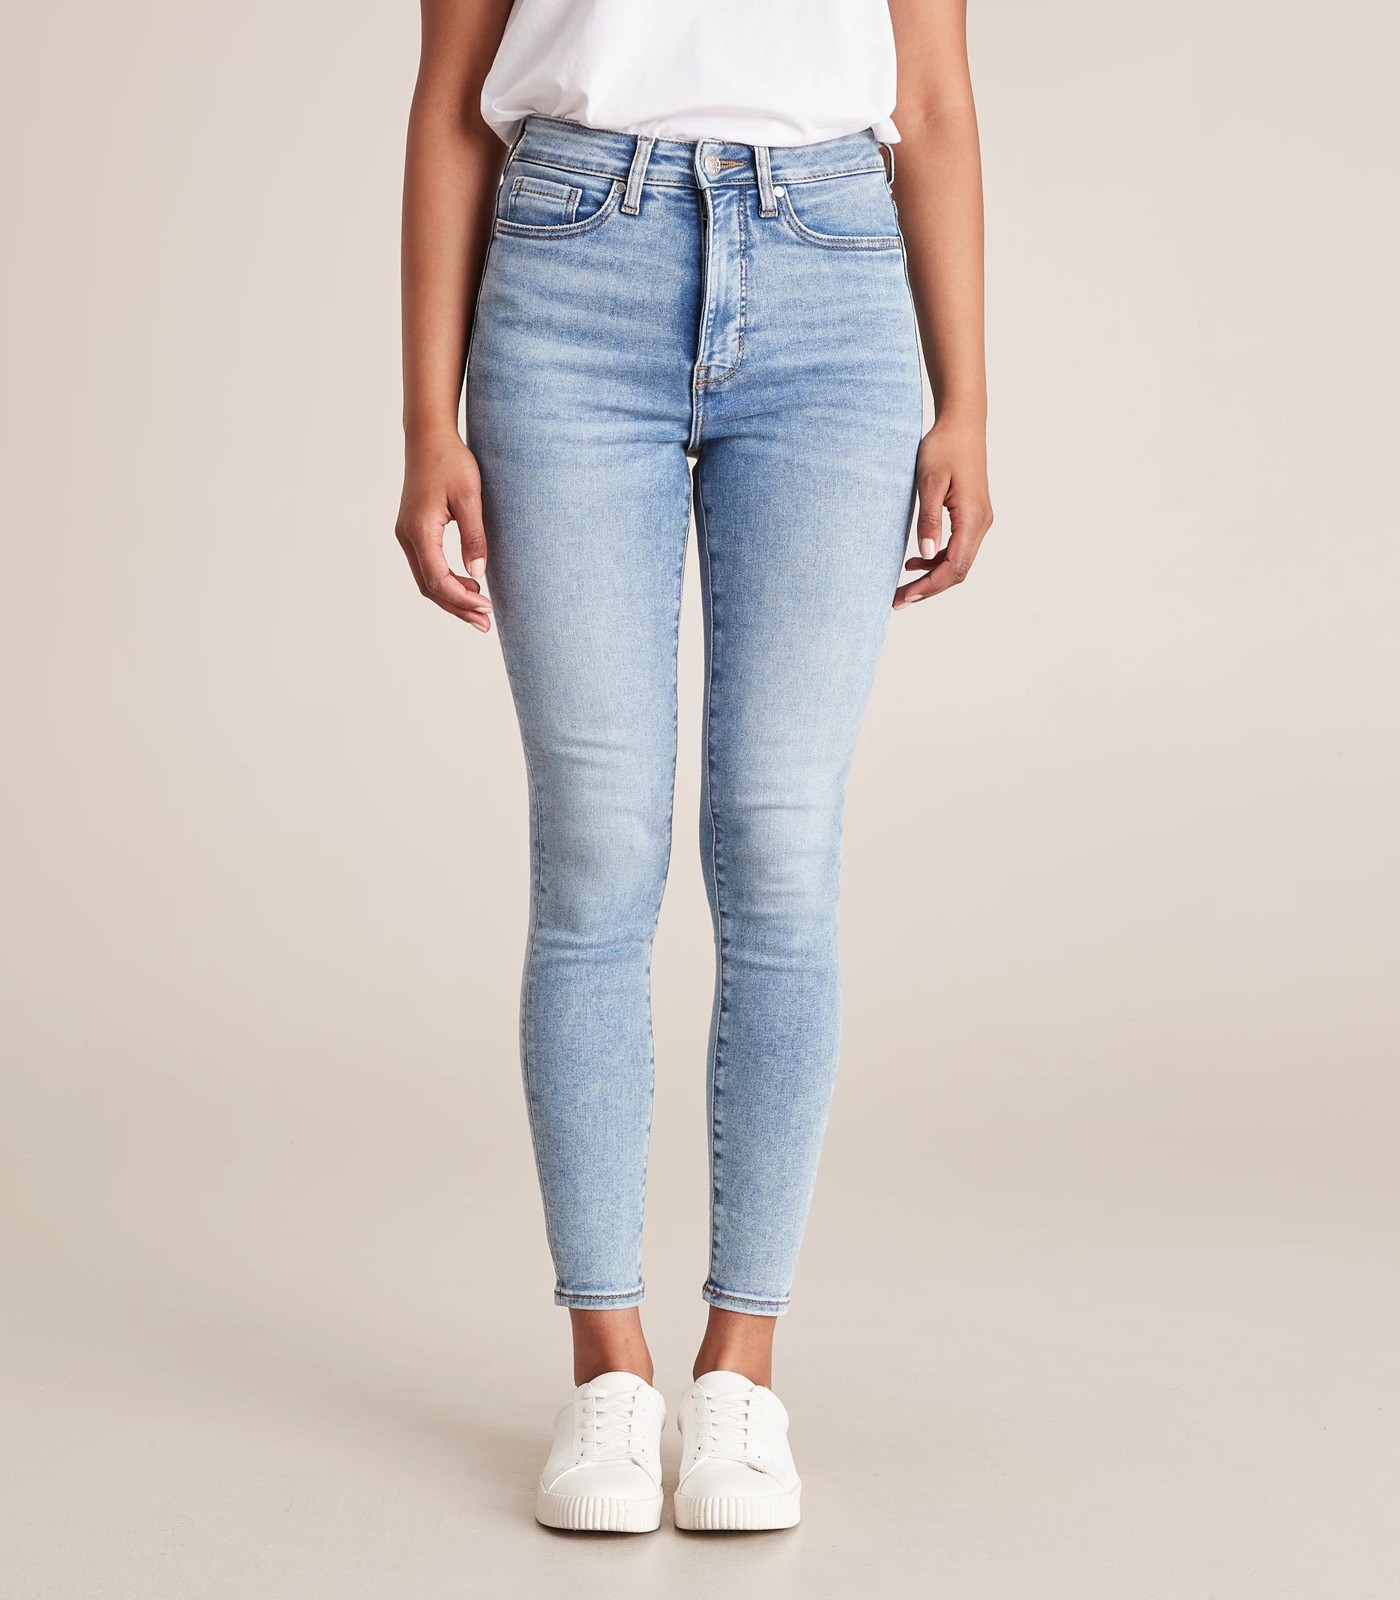 Shape Your Body Skinny High Rise Ankle Length Jeans | Target Australia